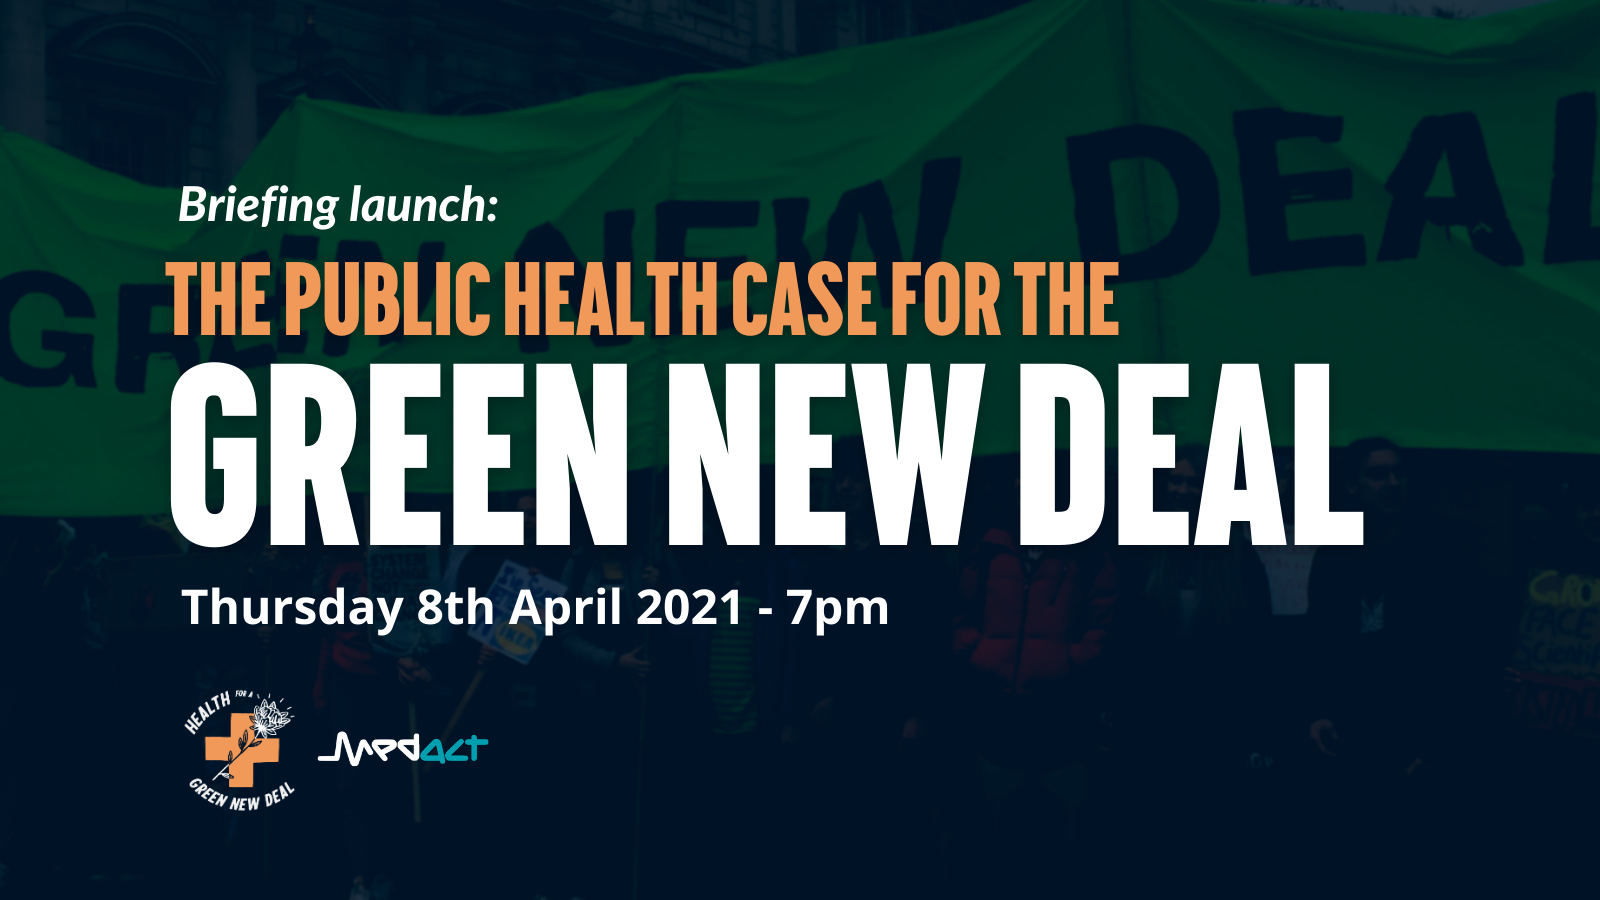 Briefing Launch: The public health case for the Green New Deal